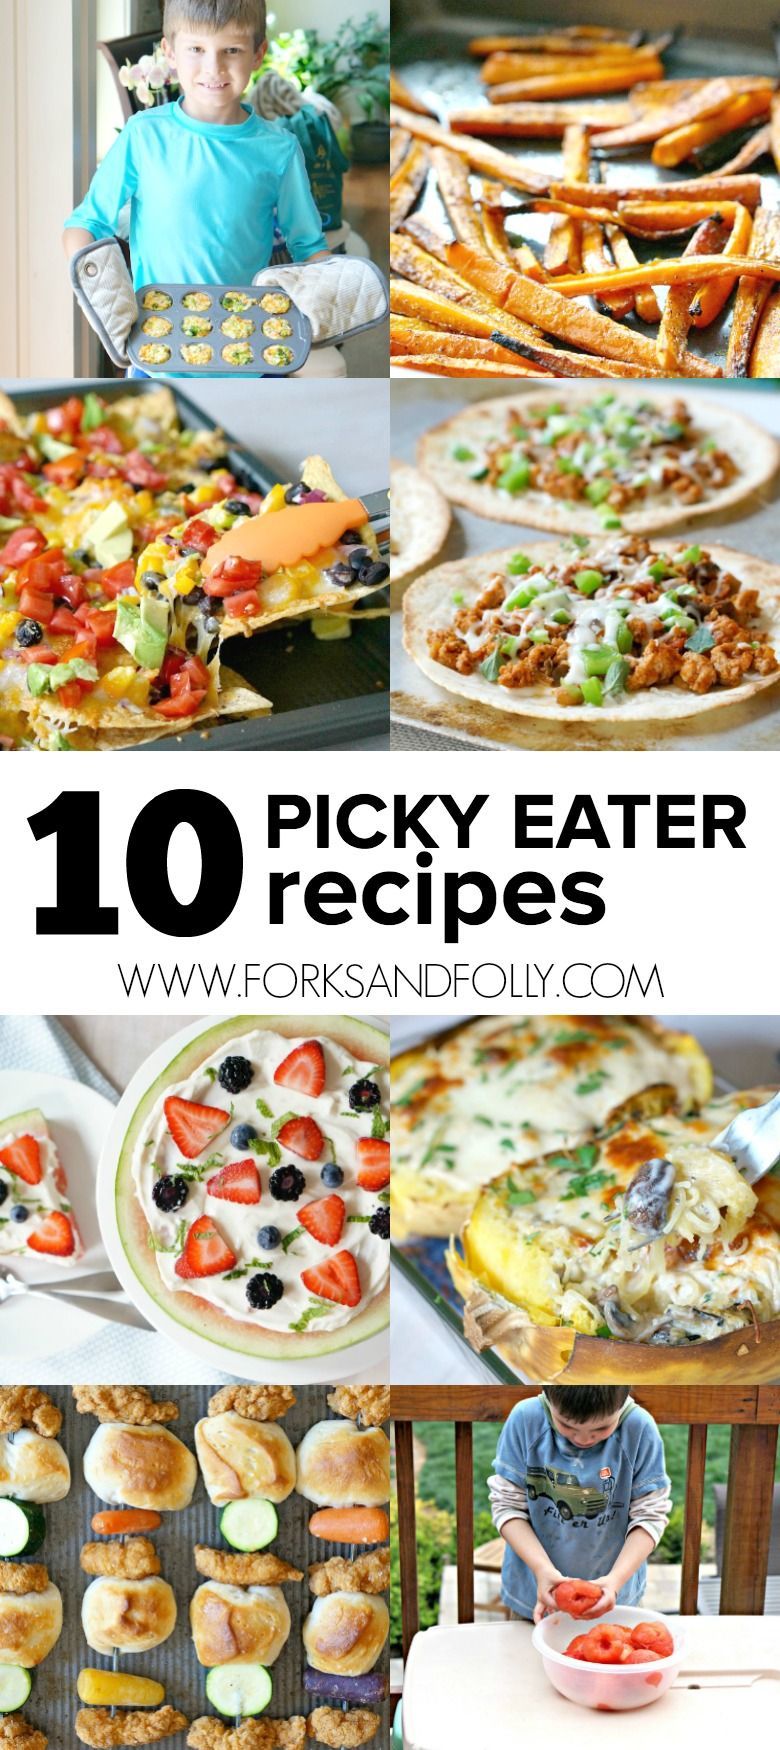 15 diet Food for picky eaters
 ideas